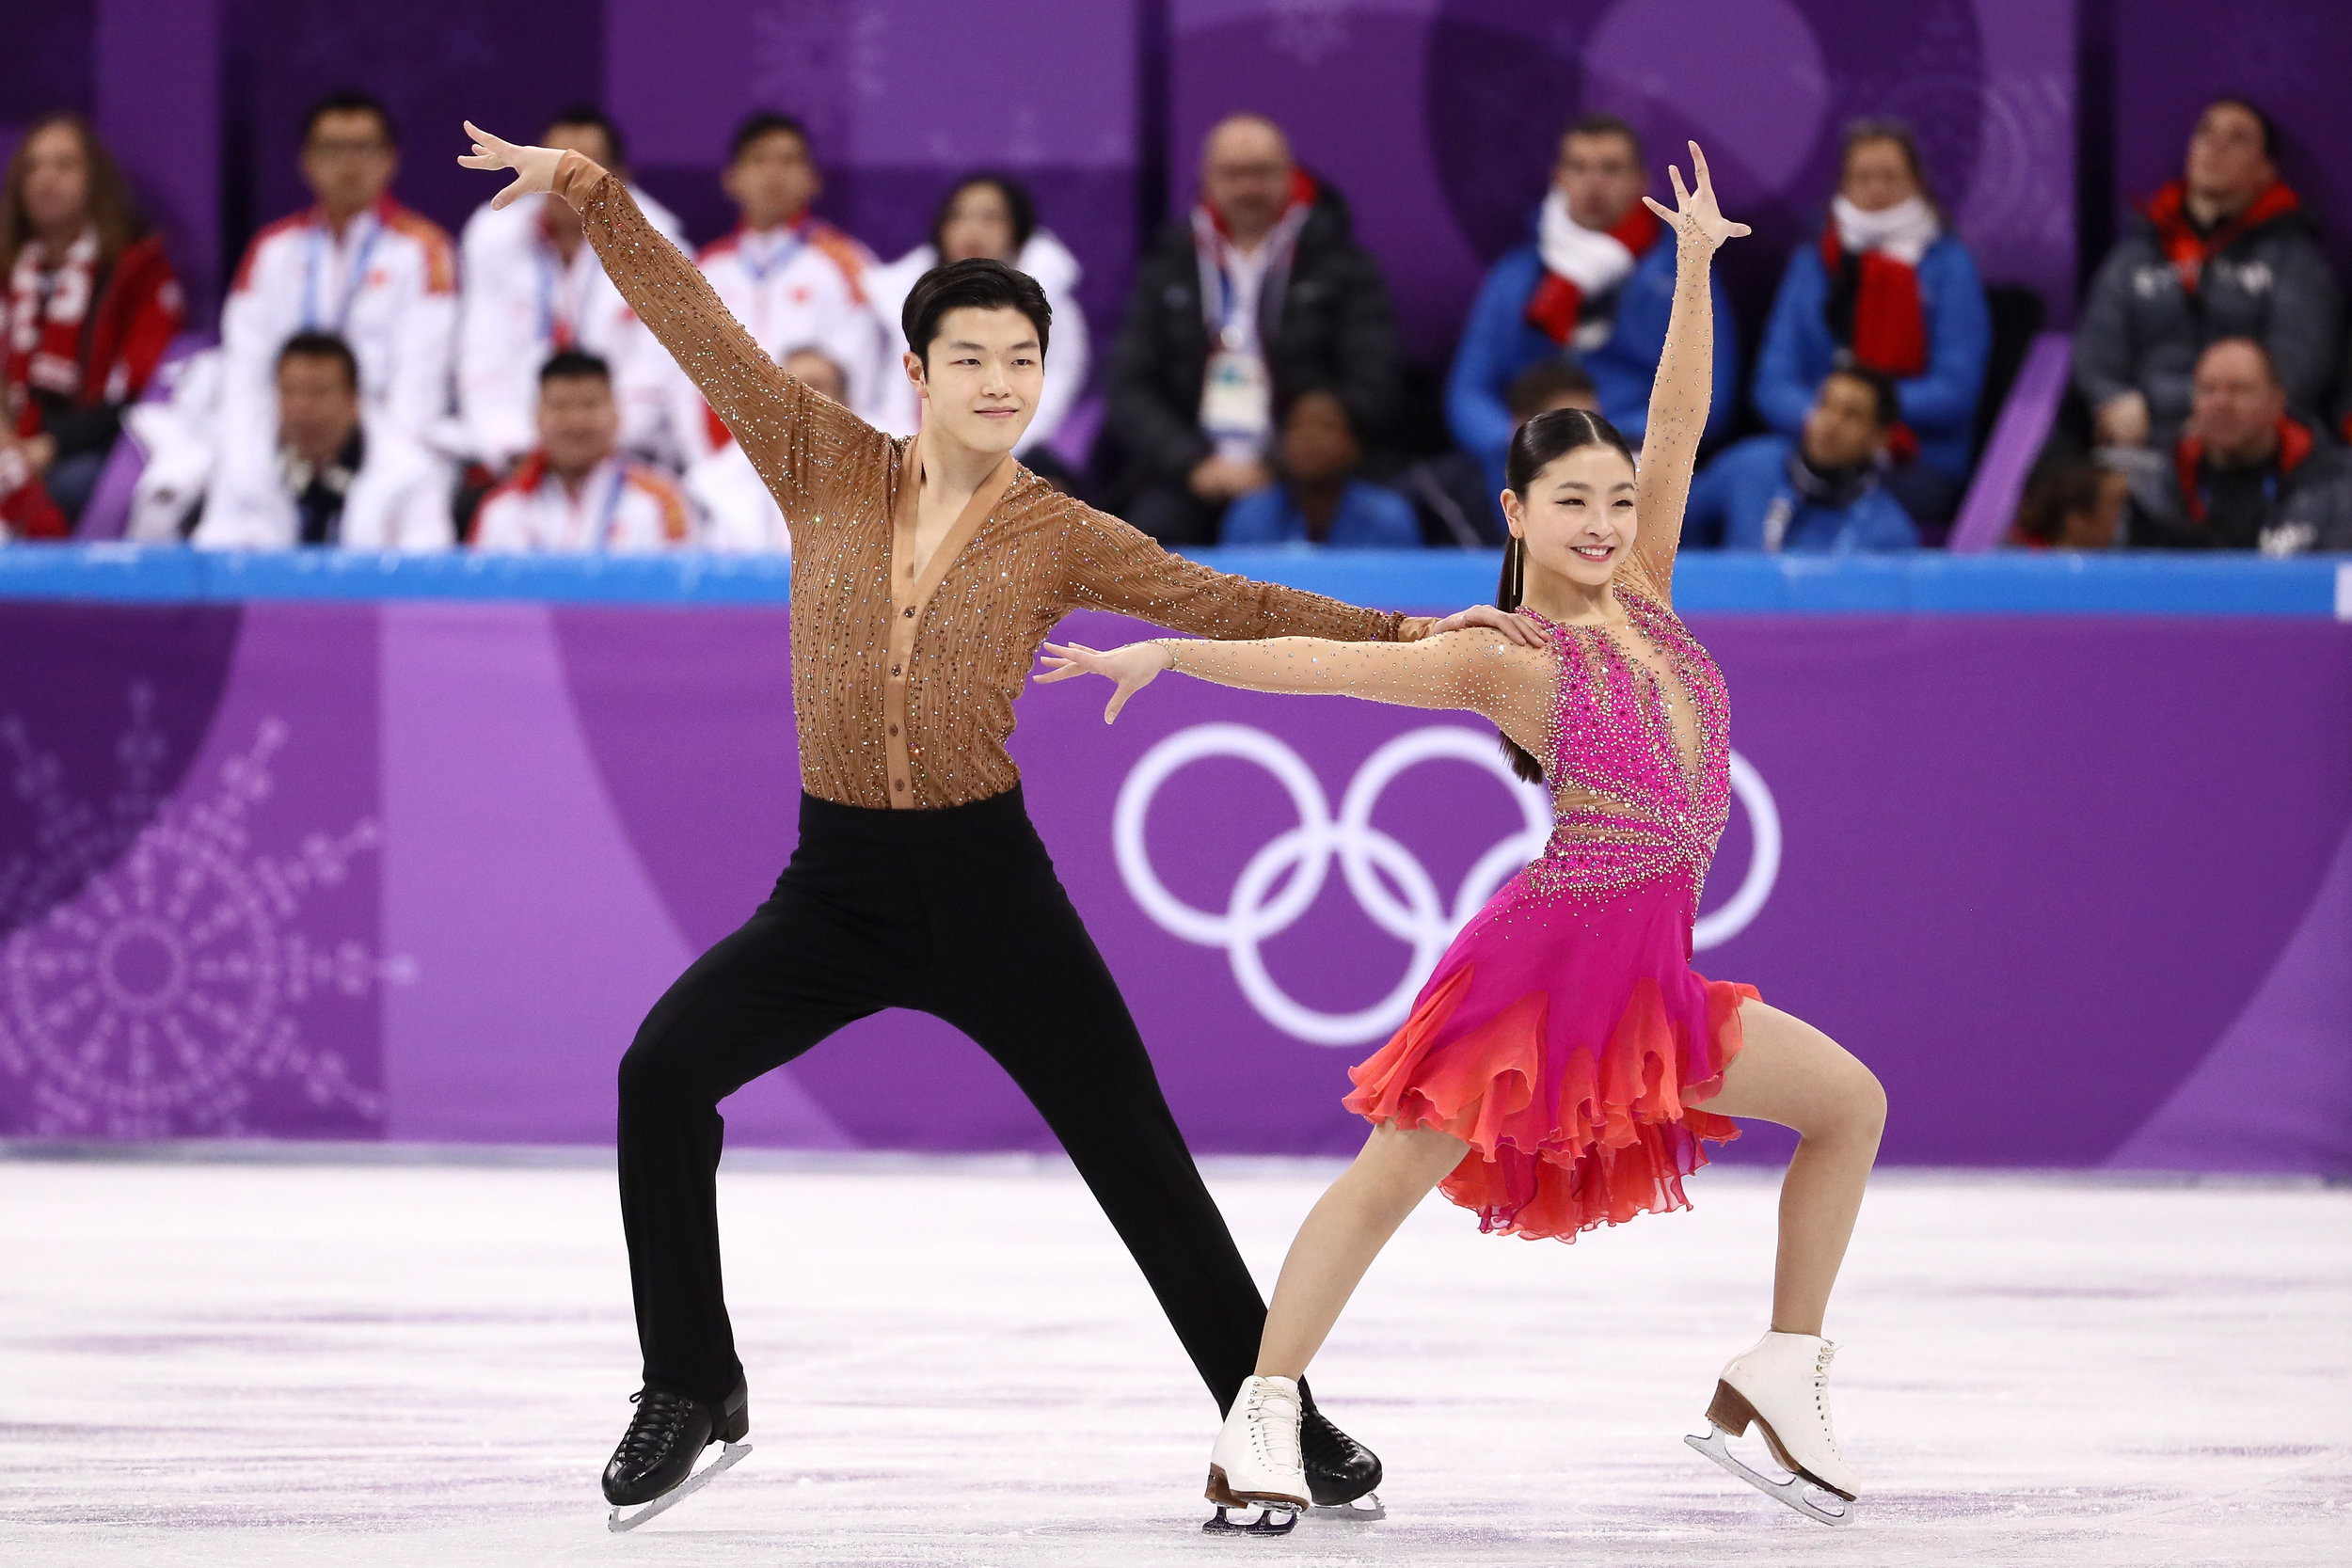 What is the Olympic figure skating exhibition gala? — Suzanne Nuyen